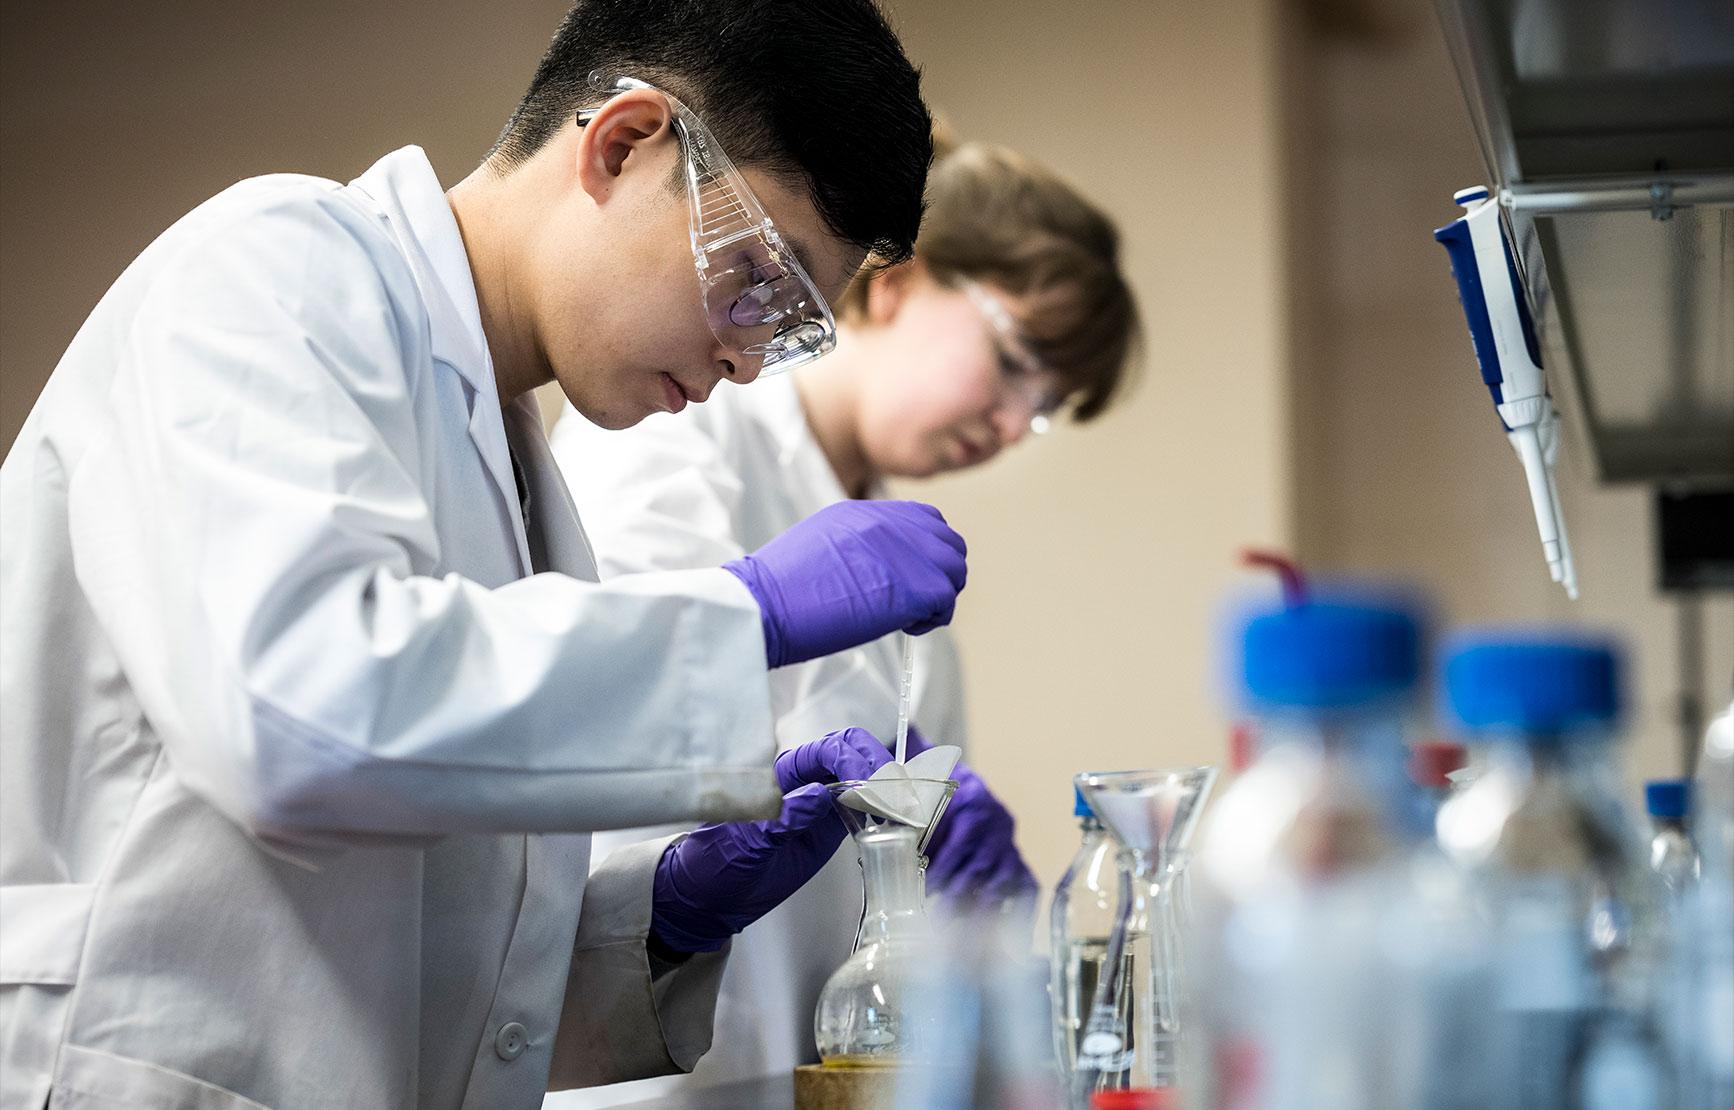 Two students working with chemicals in a lab.